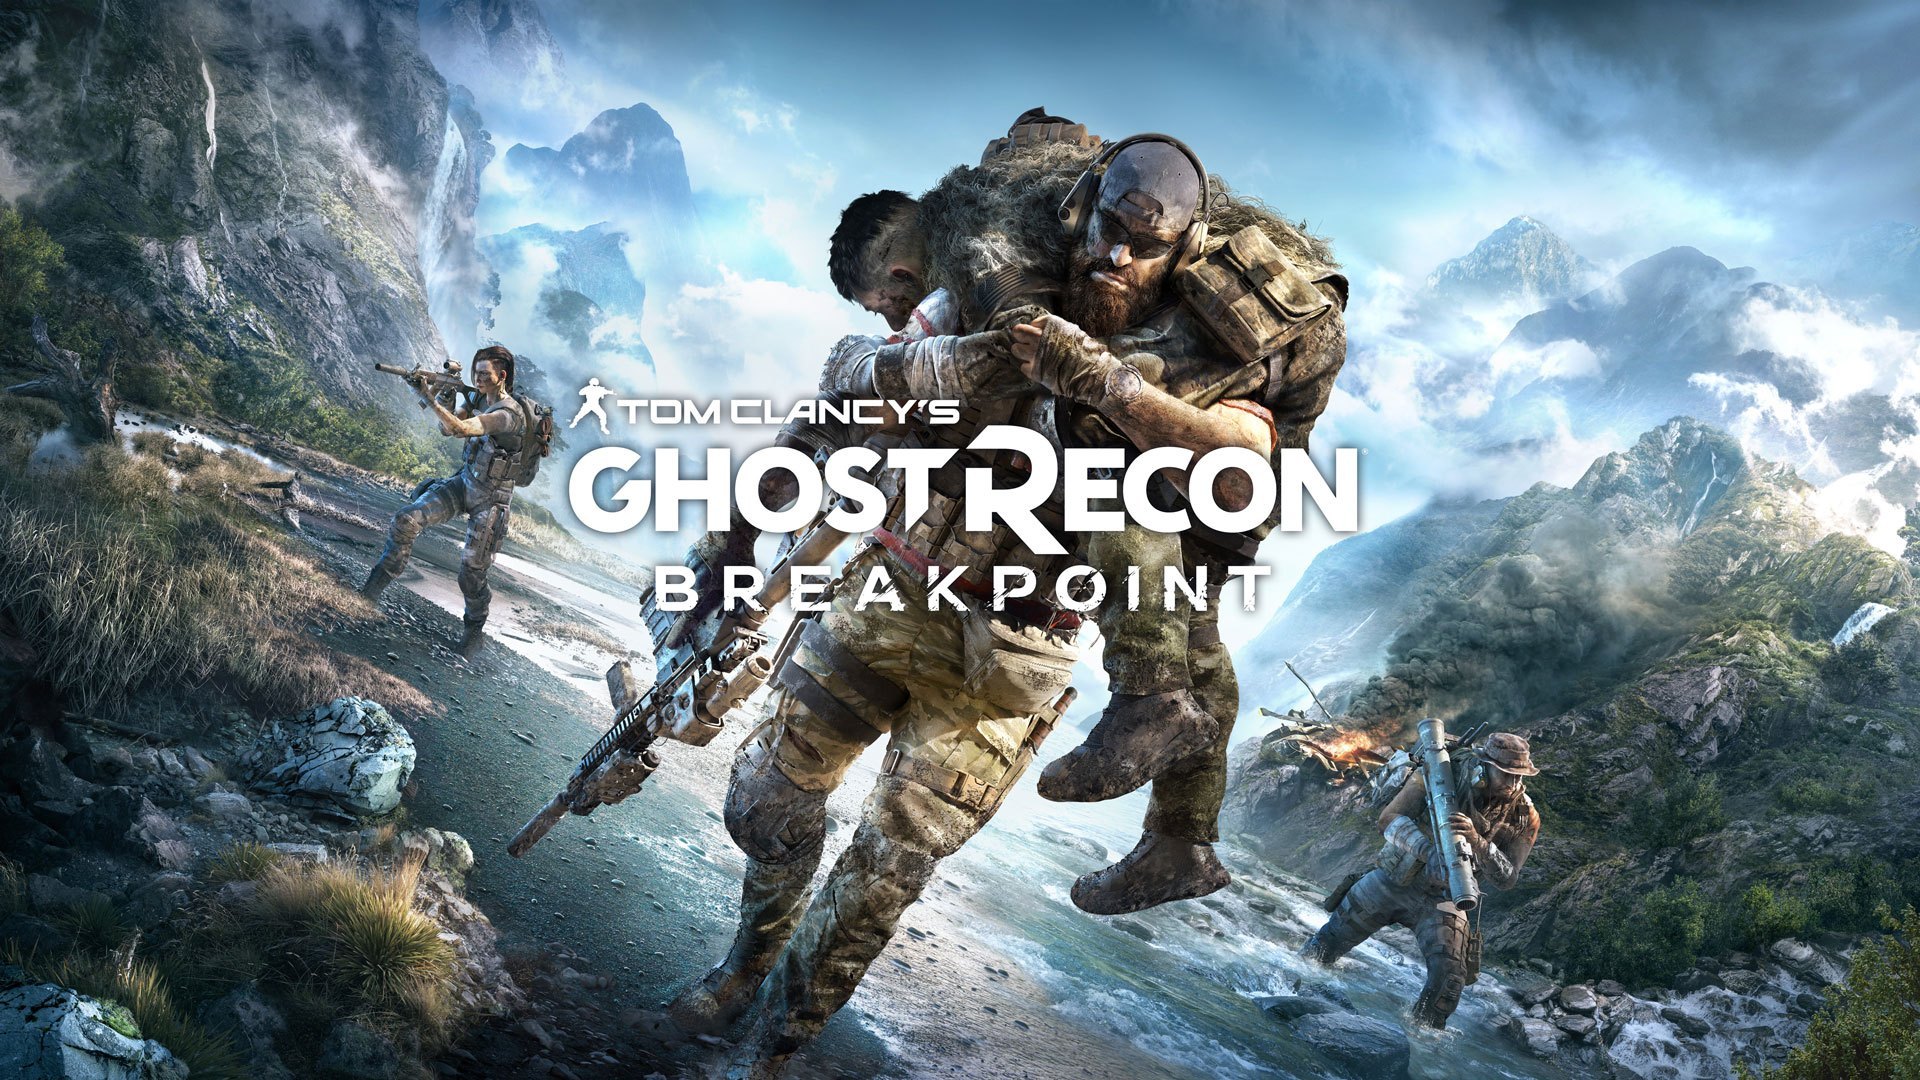 Tom Clancy’s Ghost Recon: Breakpoint Review – Losing It’s Identity